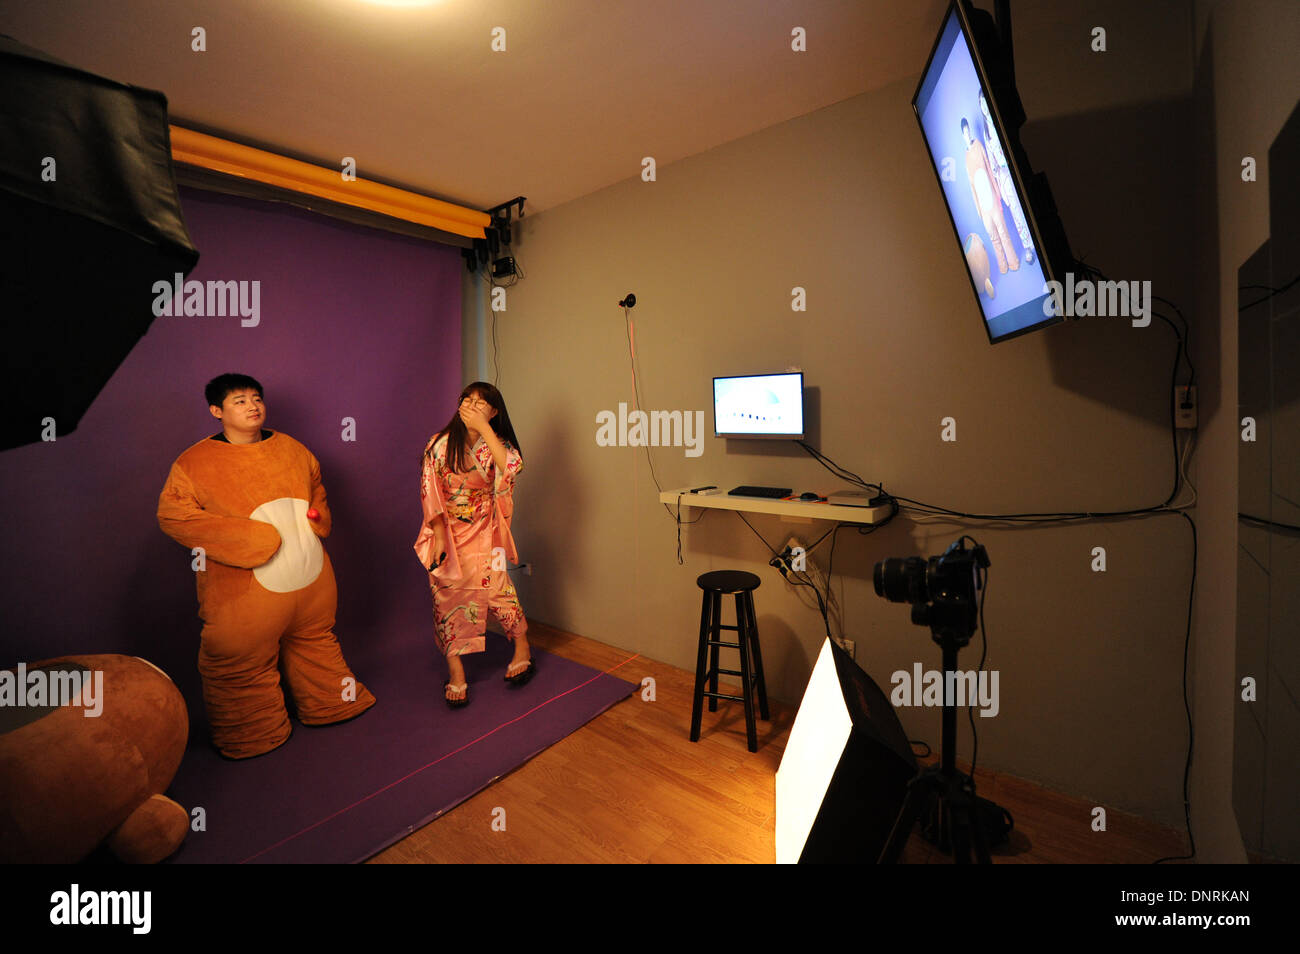 (140105) -- HANGZHOU, Jan. 4, 2014 (Xinhua) -- Two customers laugh as they see the selfies on the screen at the self shooting studio of Ke Yunxia and her partners in Hangzhou, east China's Zhejiang Province, Jan. 2, 2014. The self-shooting studio set up by Ke and her three friends was opened the same day on which 'Selfie' was named word of 2013 by Oxford Dictionaries editors in November of 2013. Selfie is not only a popular word, it's also given some graduates new way to establish their own business. In the studio, customers are not only a subject, but also a photographers. They can choose the Stock Photo